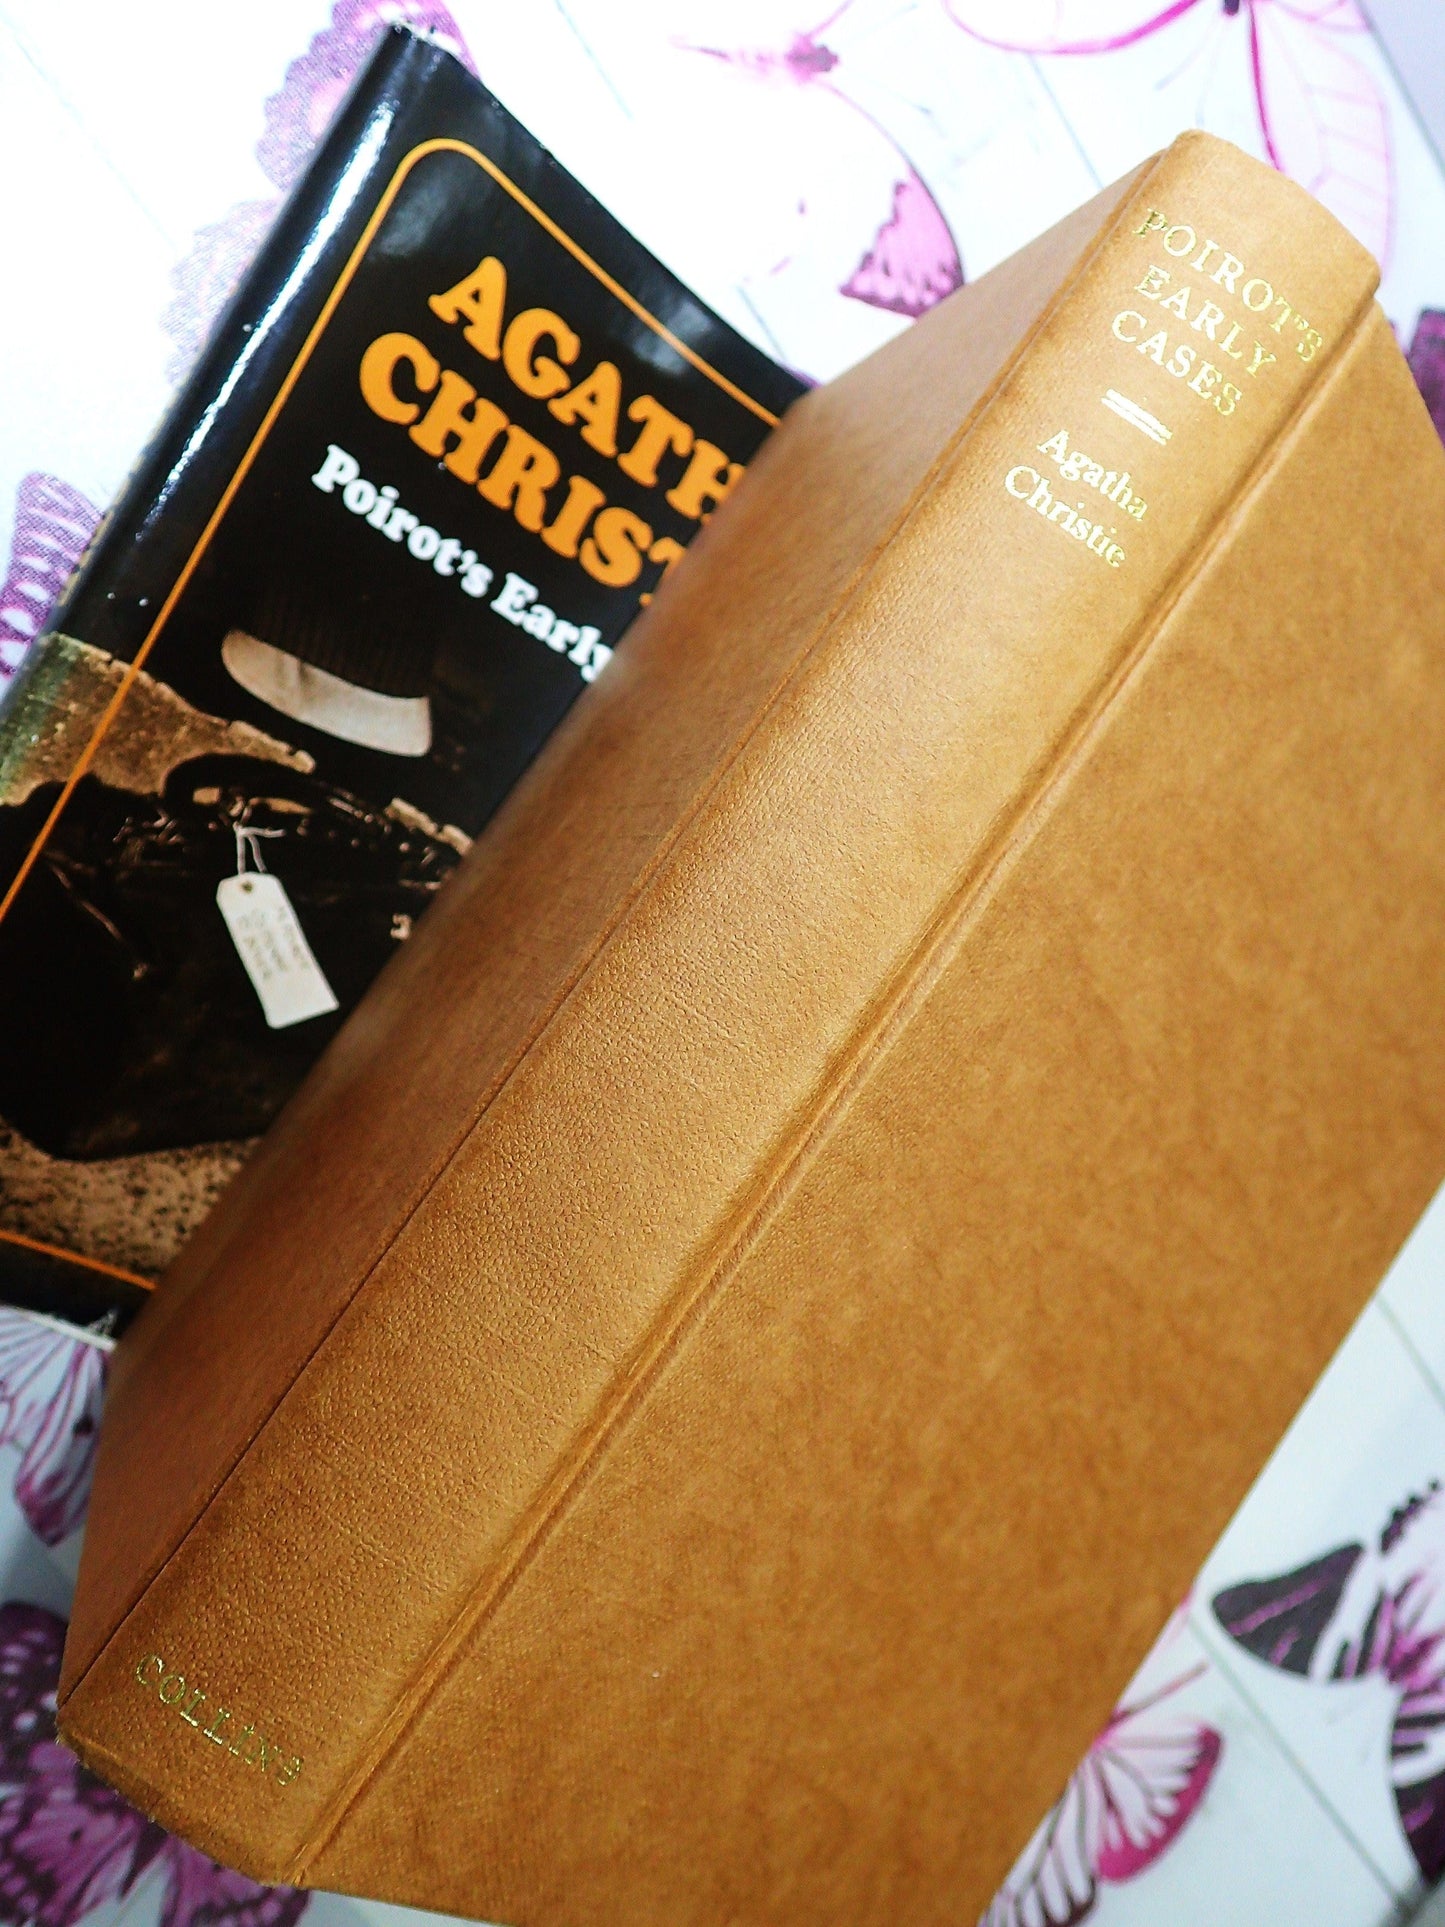 Brown cloth and gilt titles on binding of Poirot's Early Cases first edition Agatha Christie